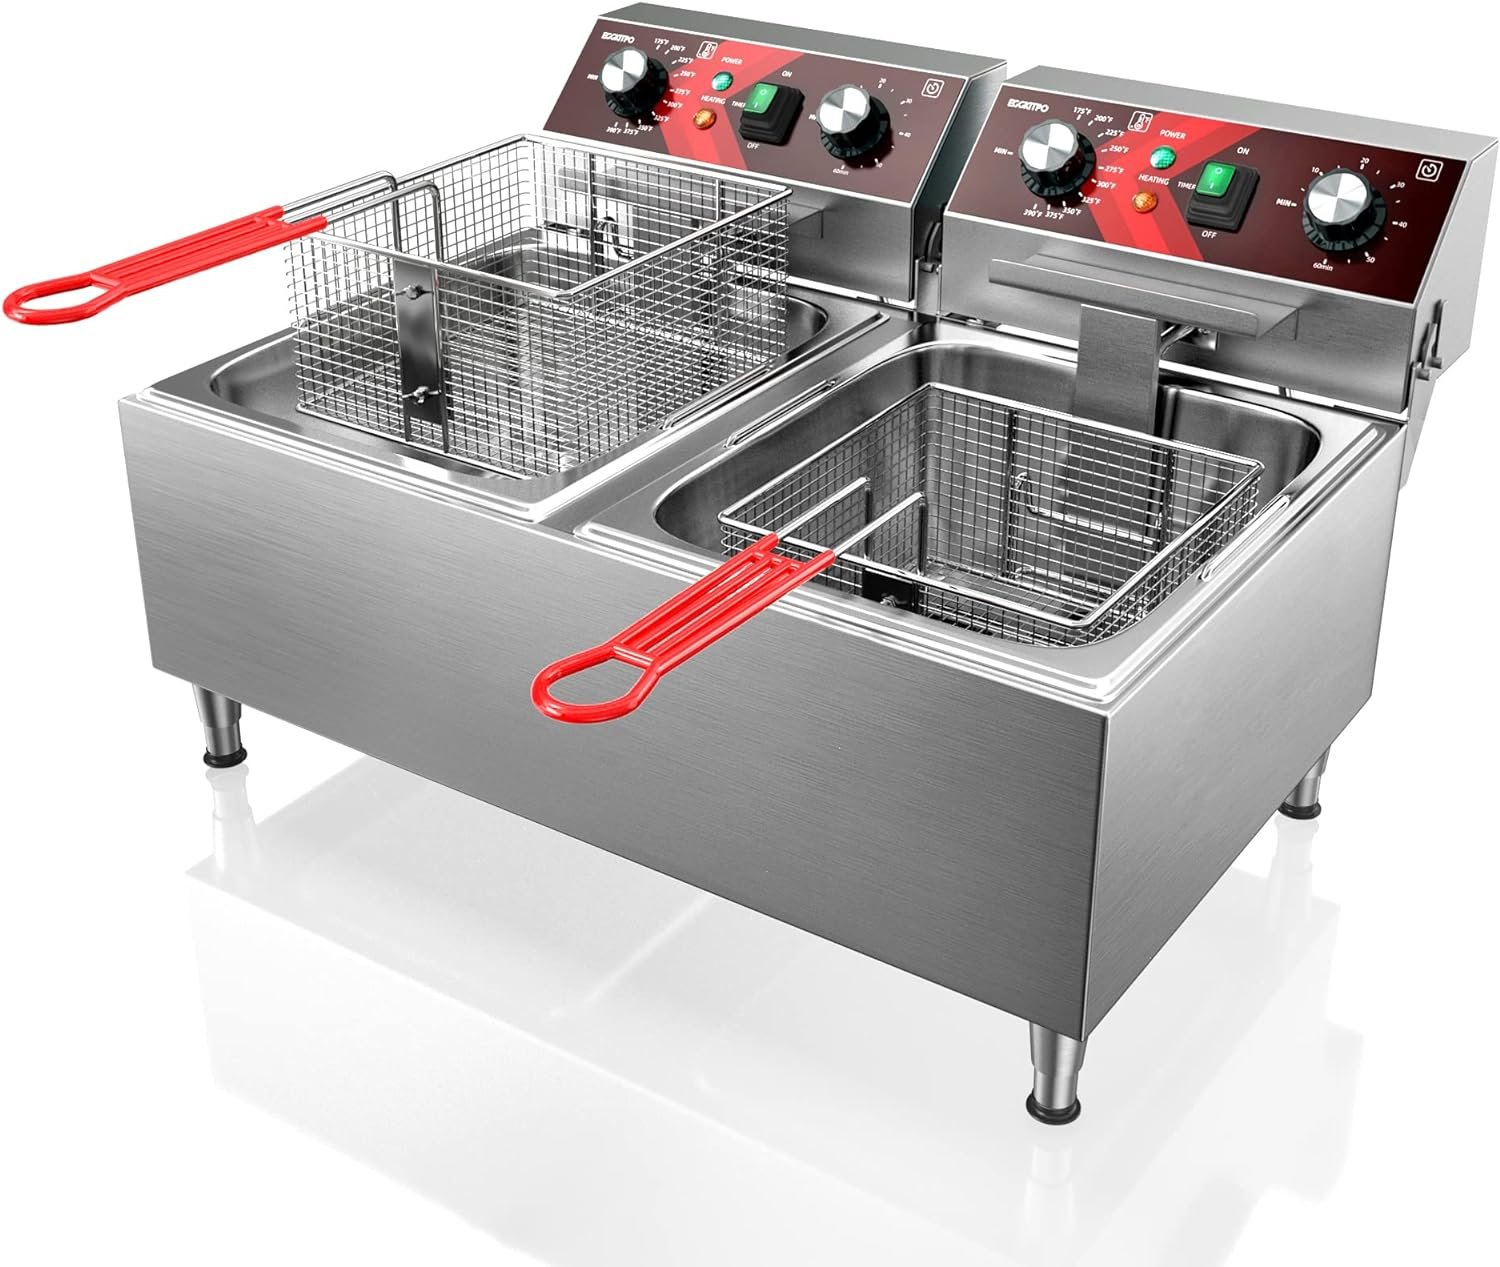 EGGKITPO Deep Fryers Stainless Steel Commercial Deep fryer with Timer Dual Tank Electric Deep Fryer with 2 Baskets Large Capacity 10L X 2 Electric Countertop Fryer for Restaurant and Home, 120V 3600W